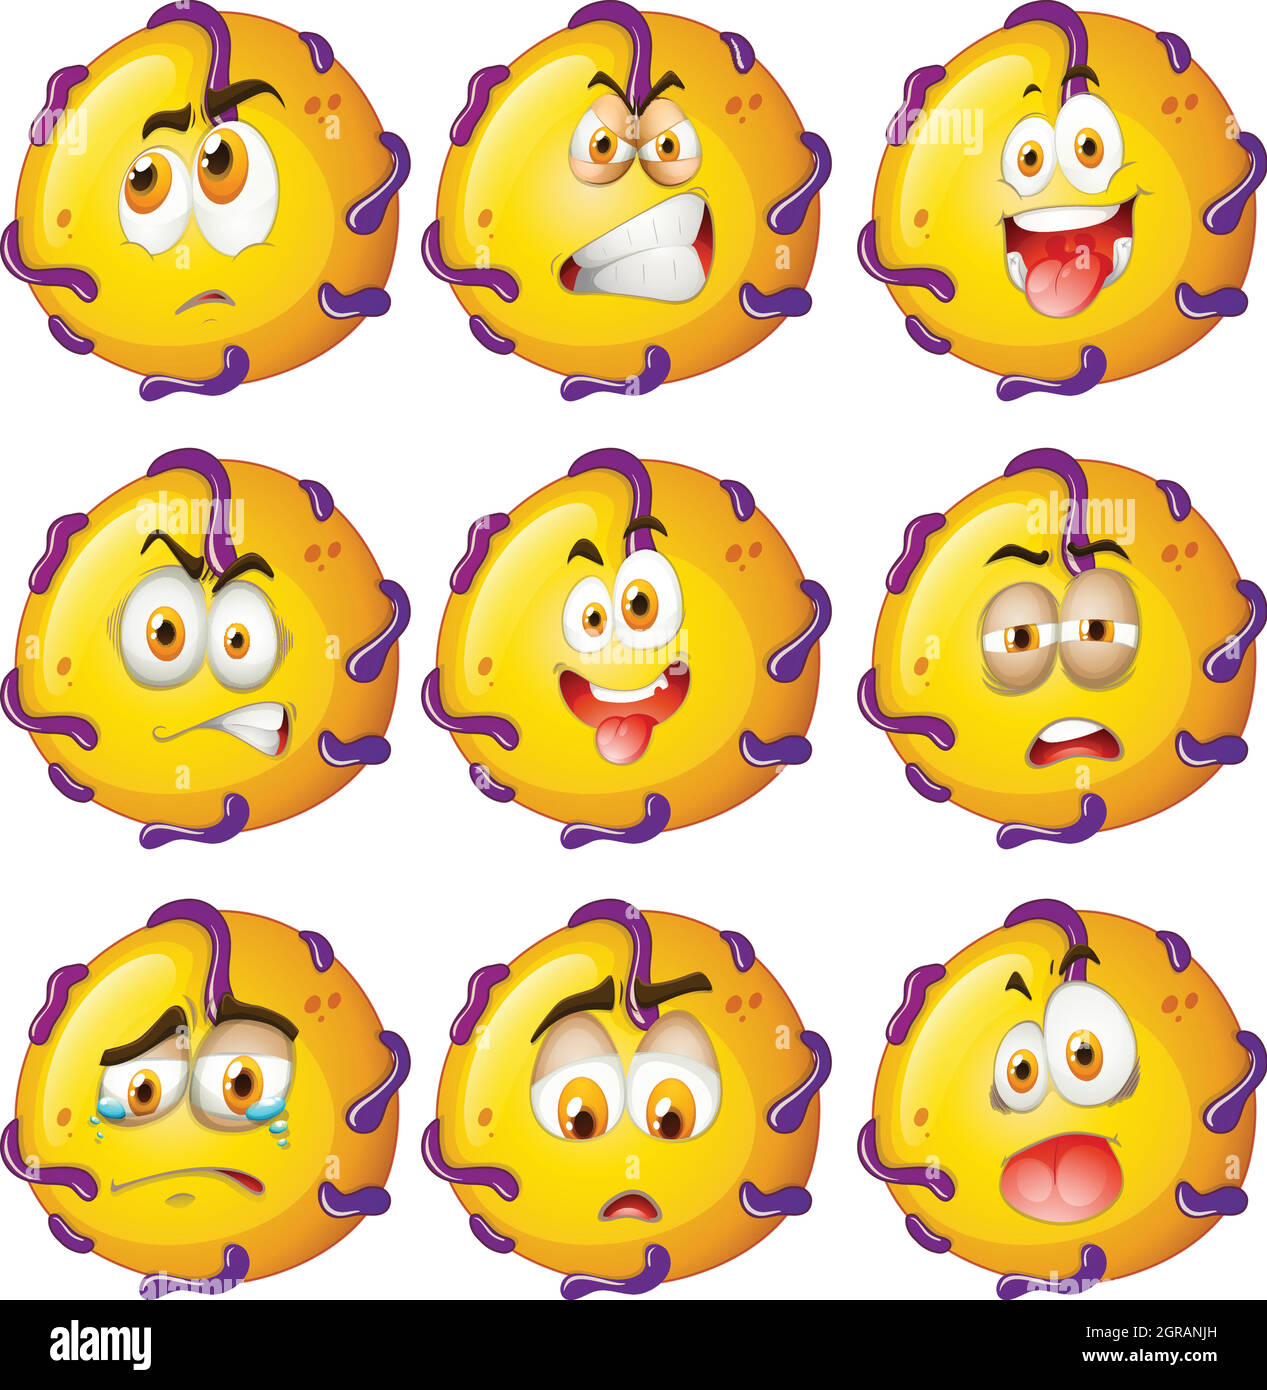 Yellow critter with facial expressions Stock Vector